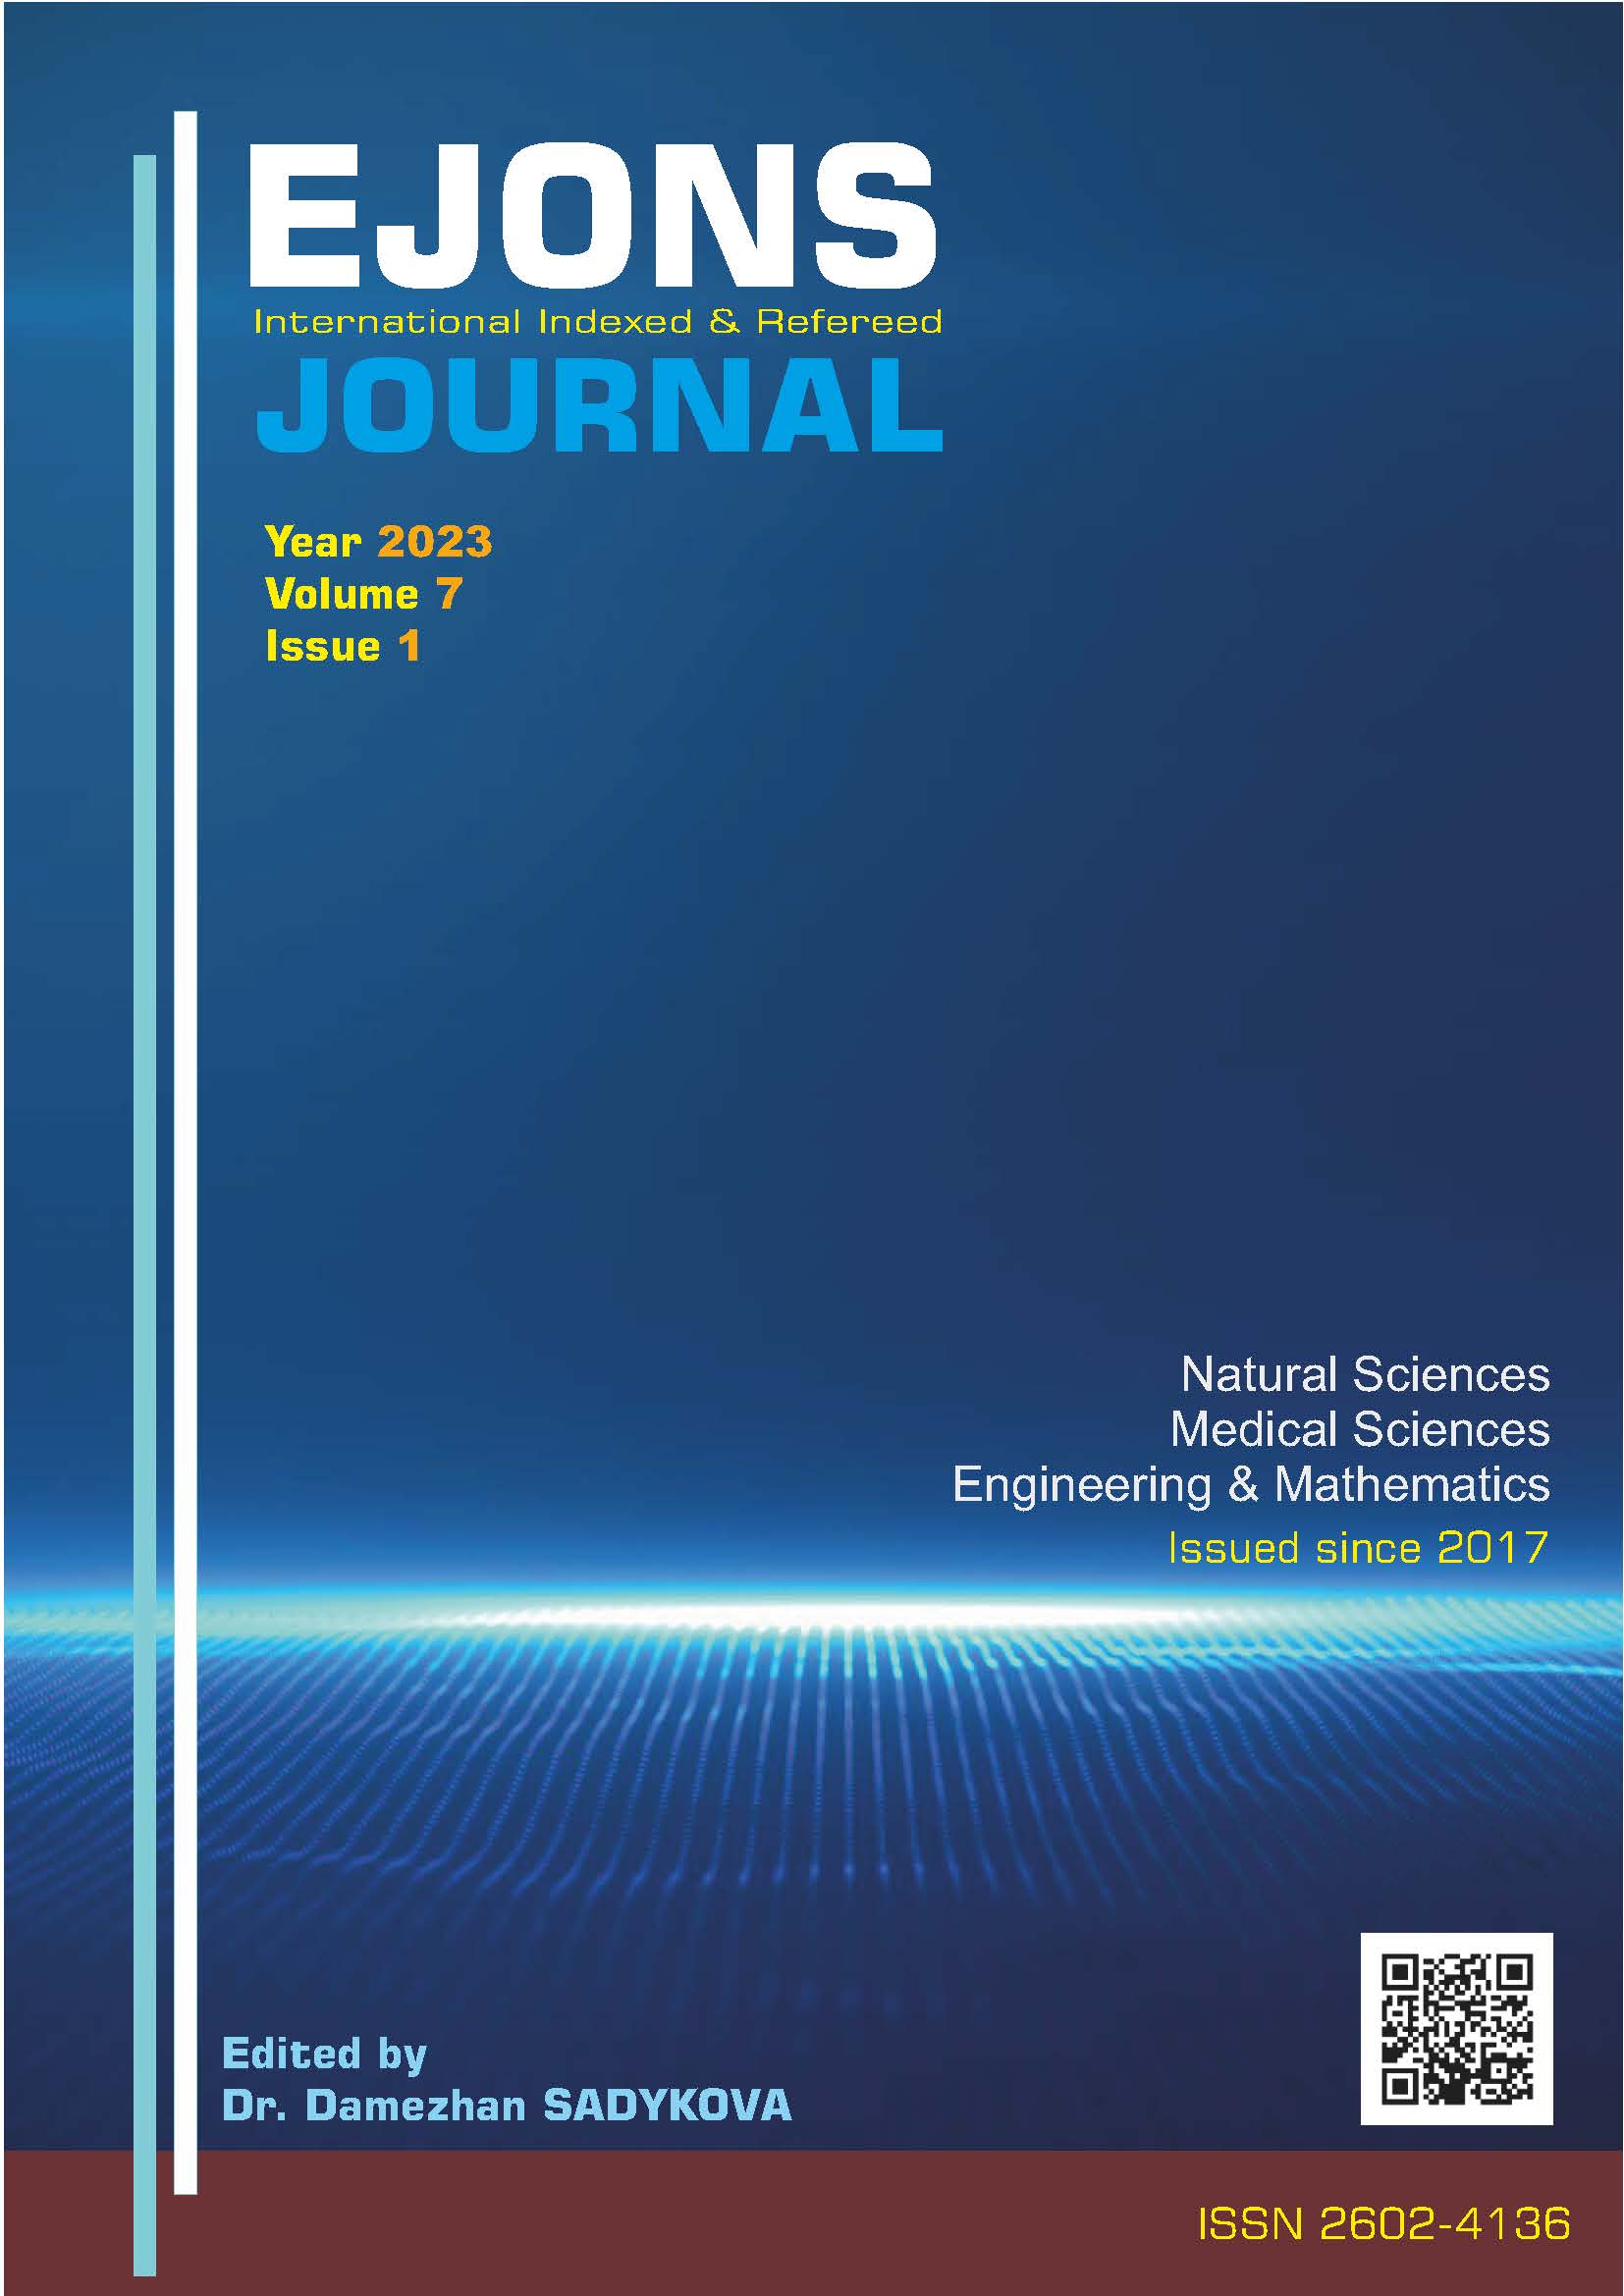 					View Vol. 7 No. 1 (2023): EJONS Journal Volume 7 Issue 1
				